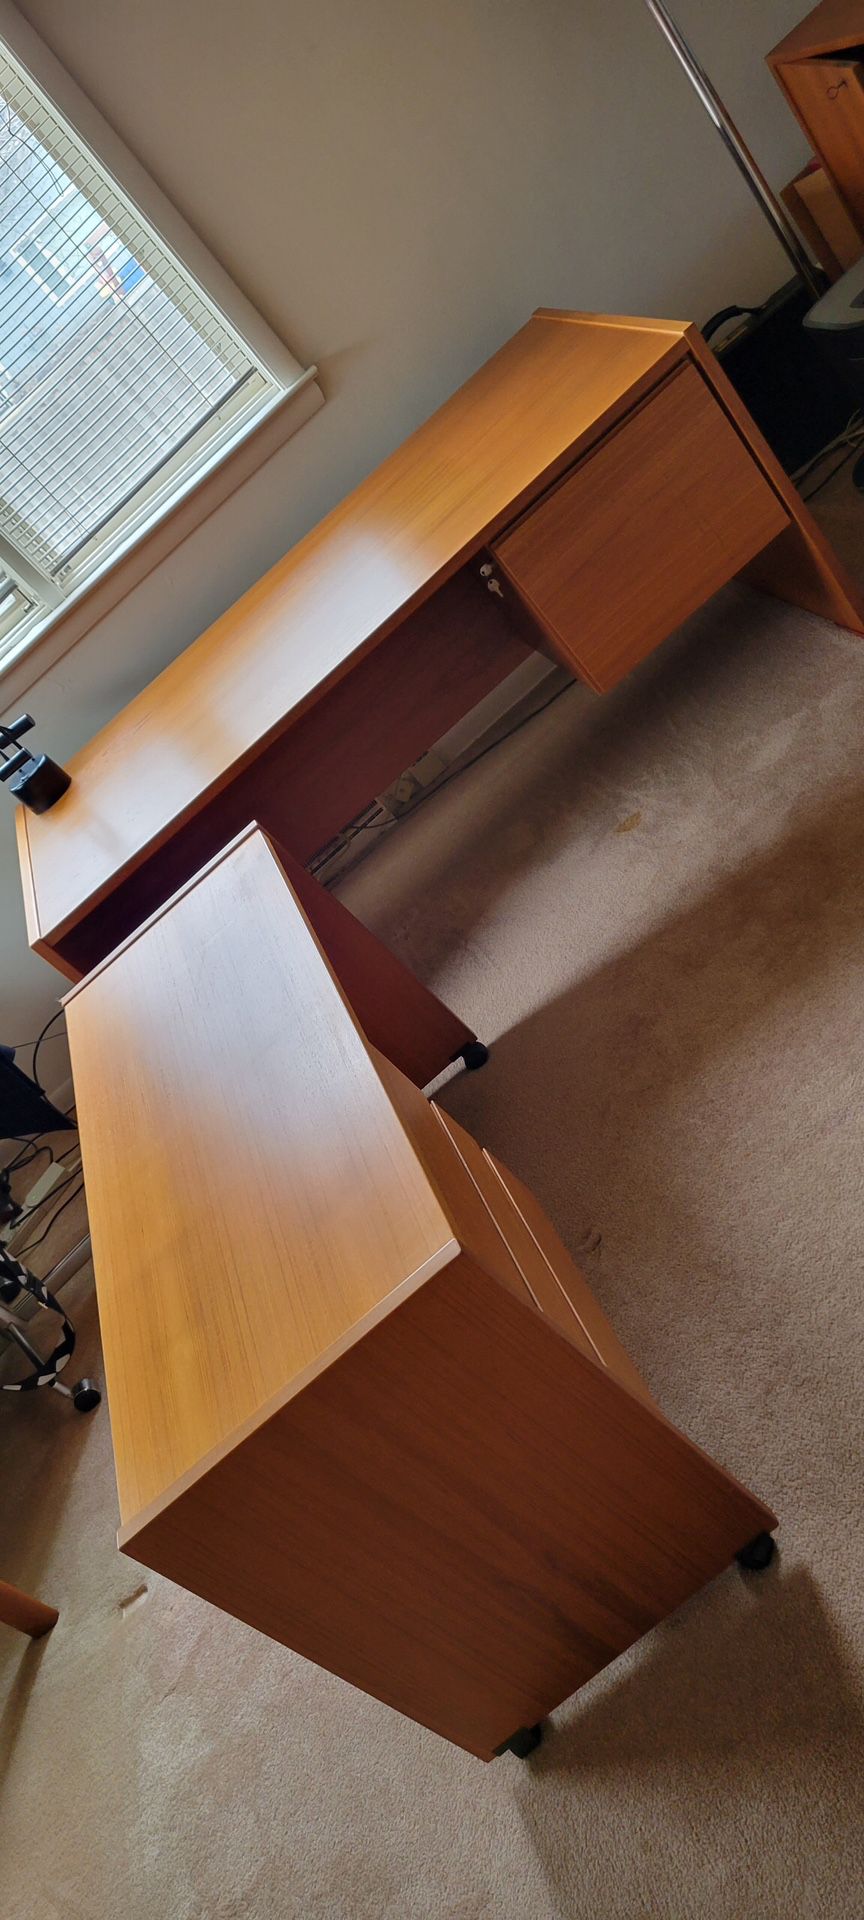 Teak desk set perfect for home office - must move by 4/3